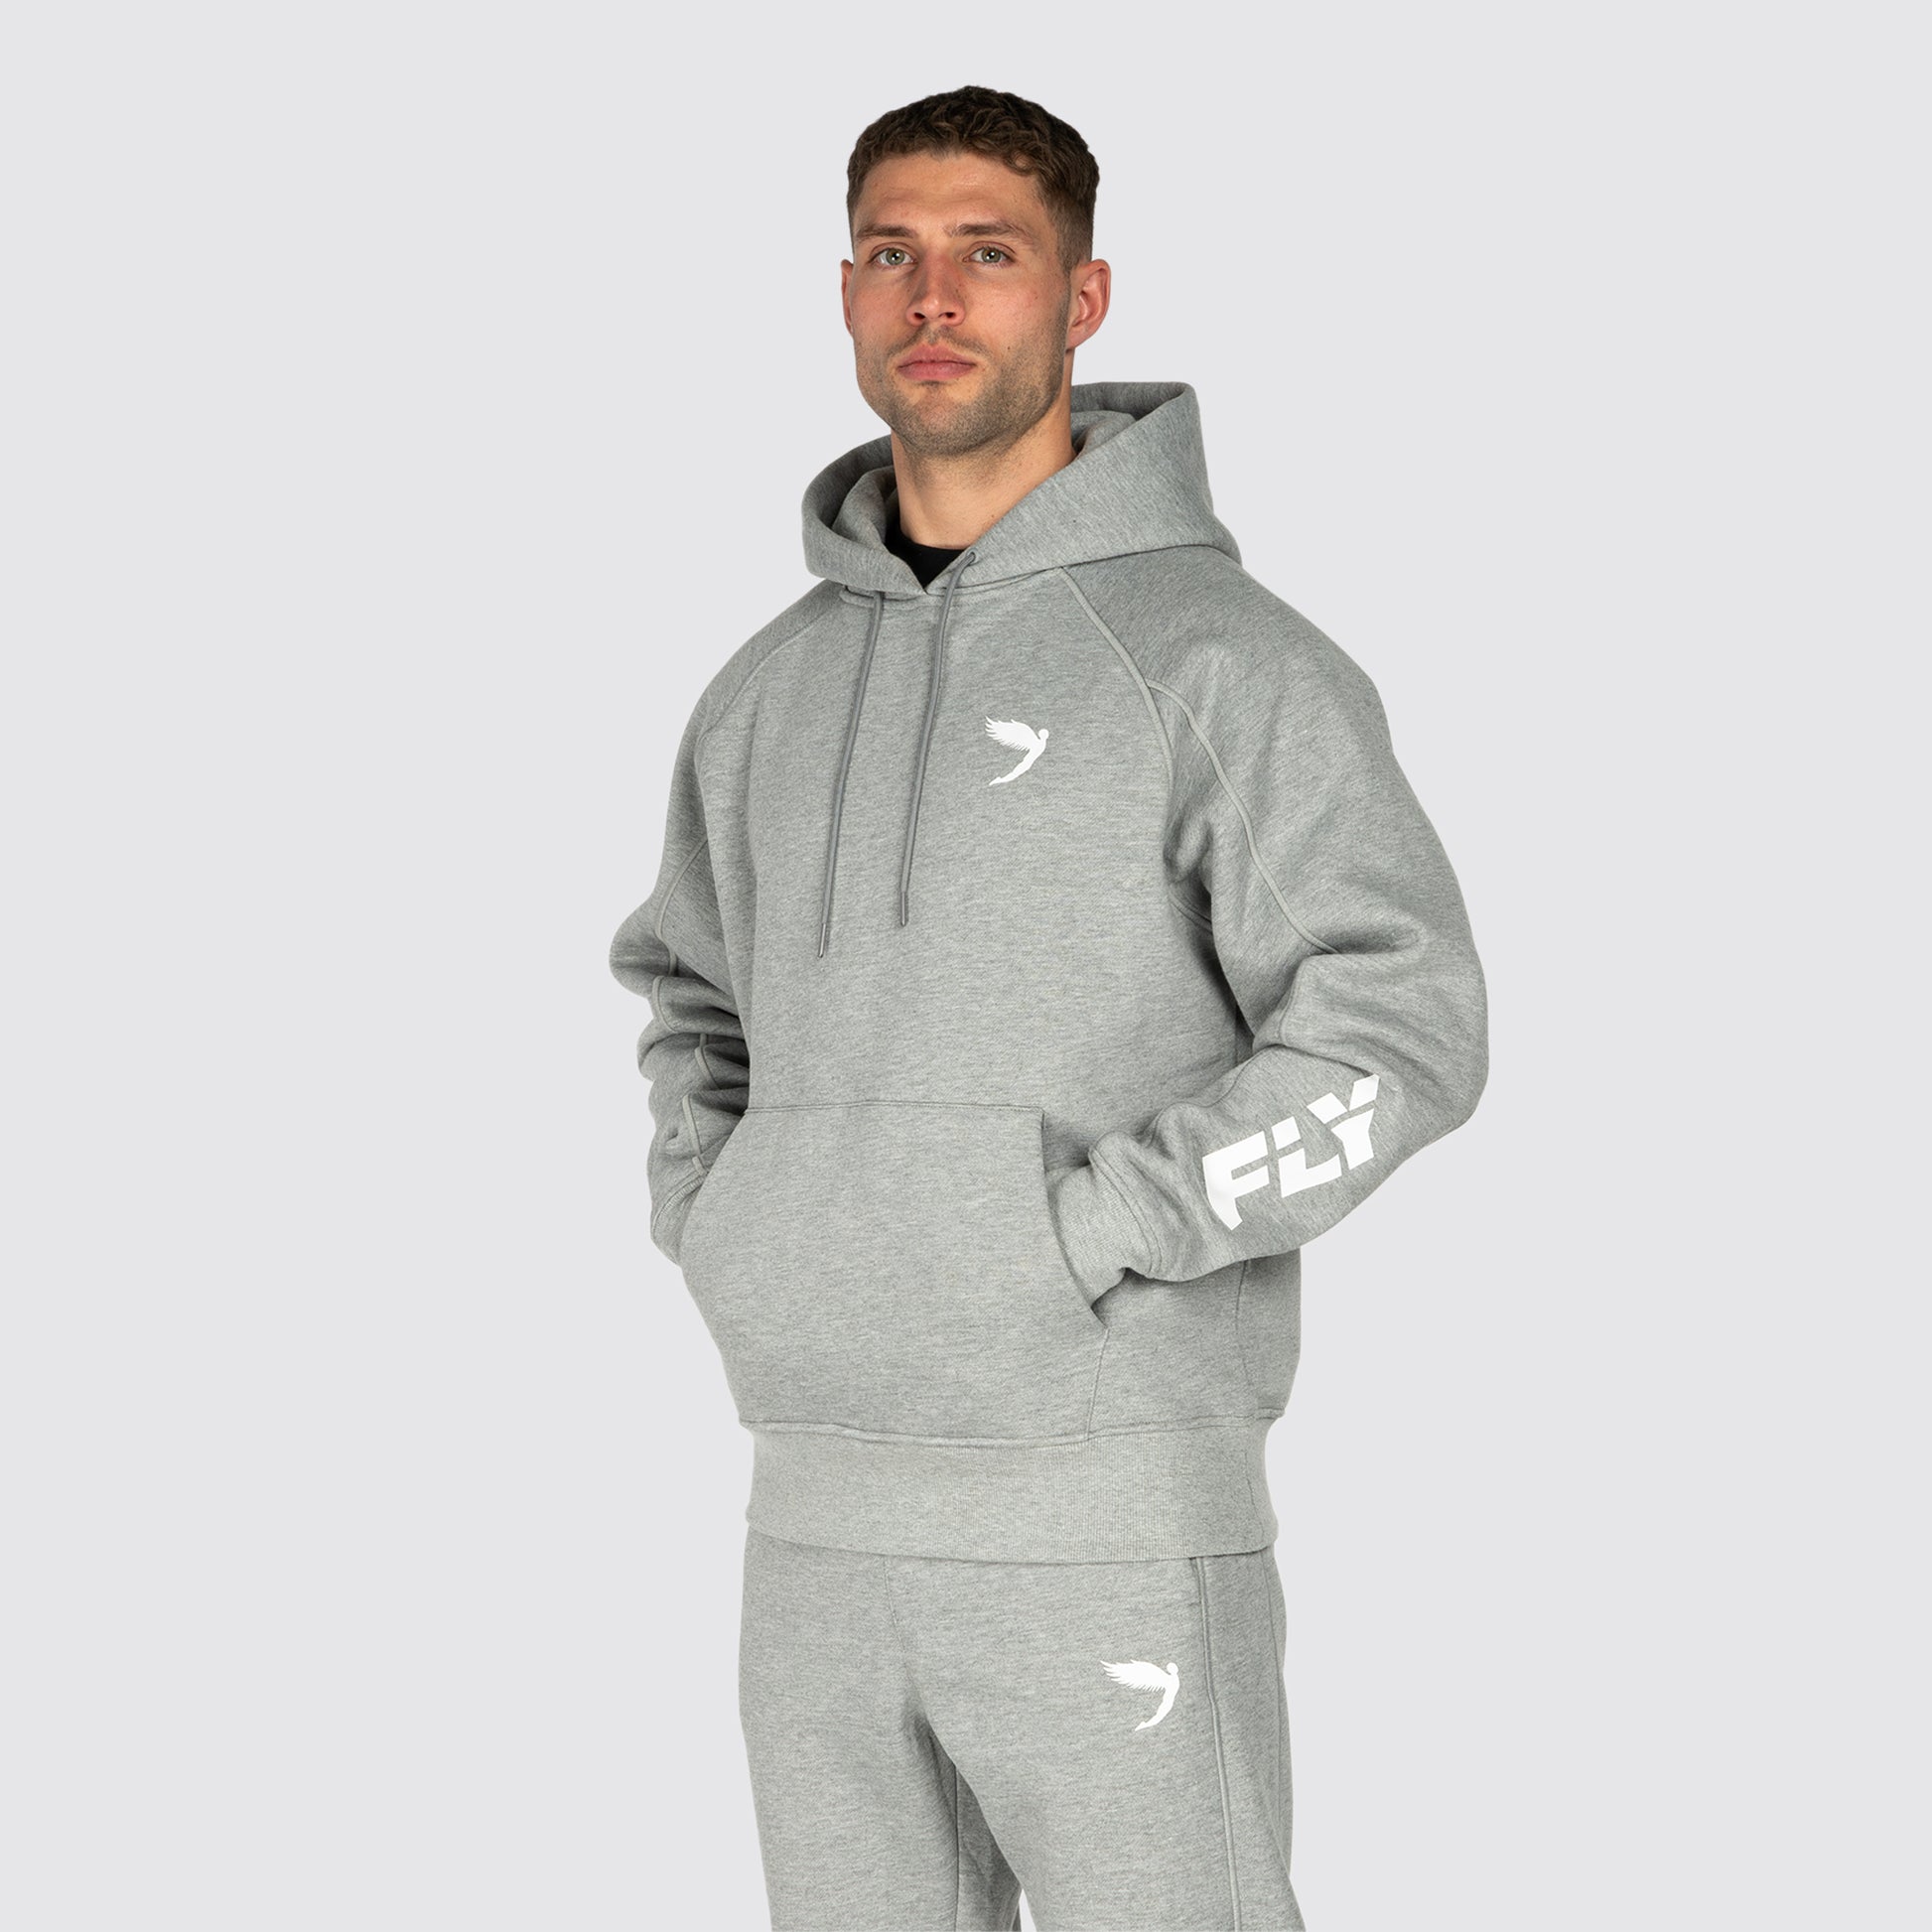 Undisputed Relaxed Fit Hoodie (8244004421884)